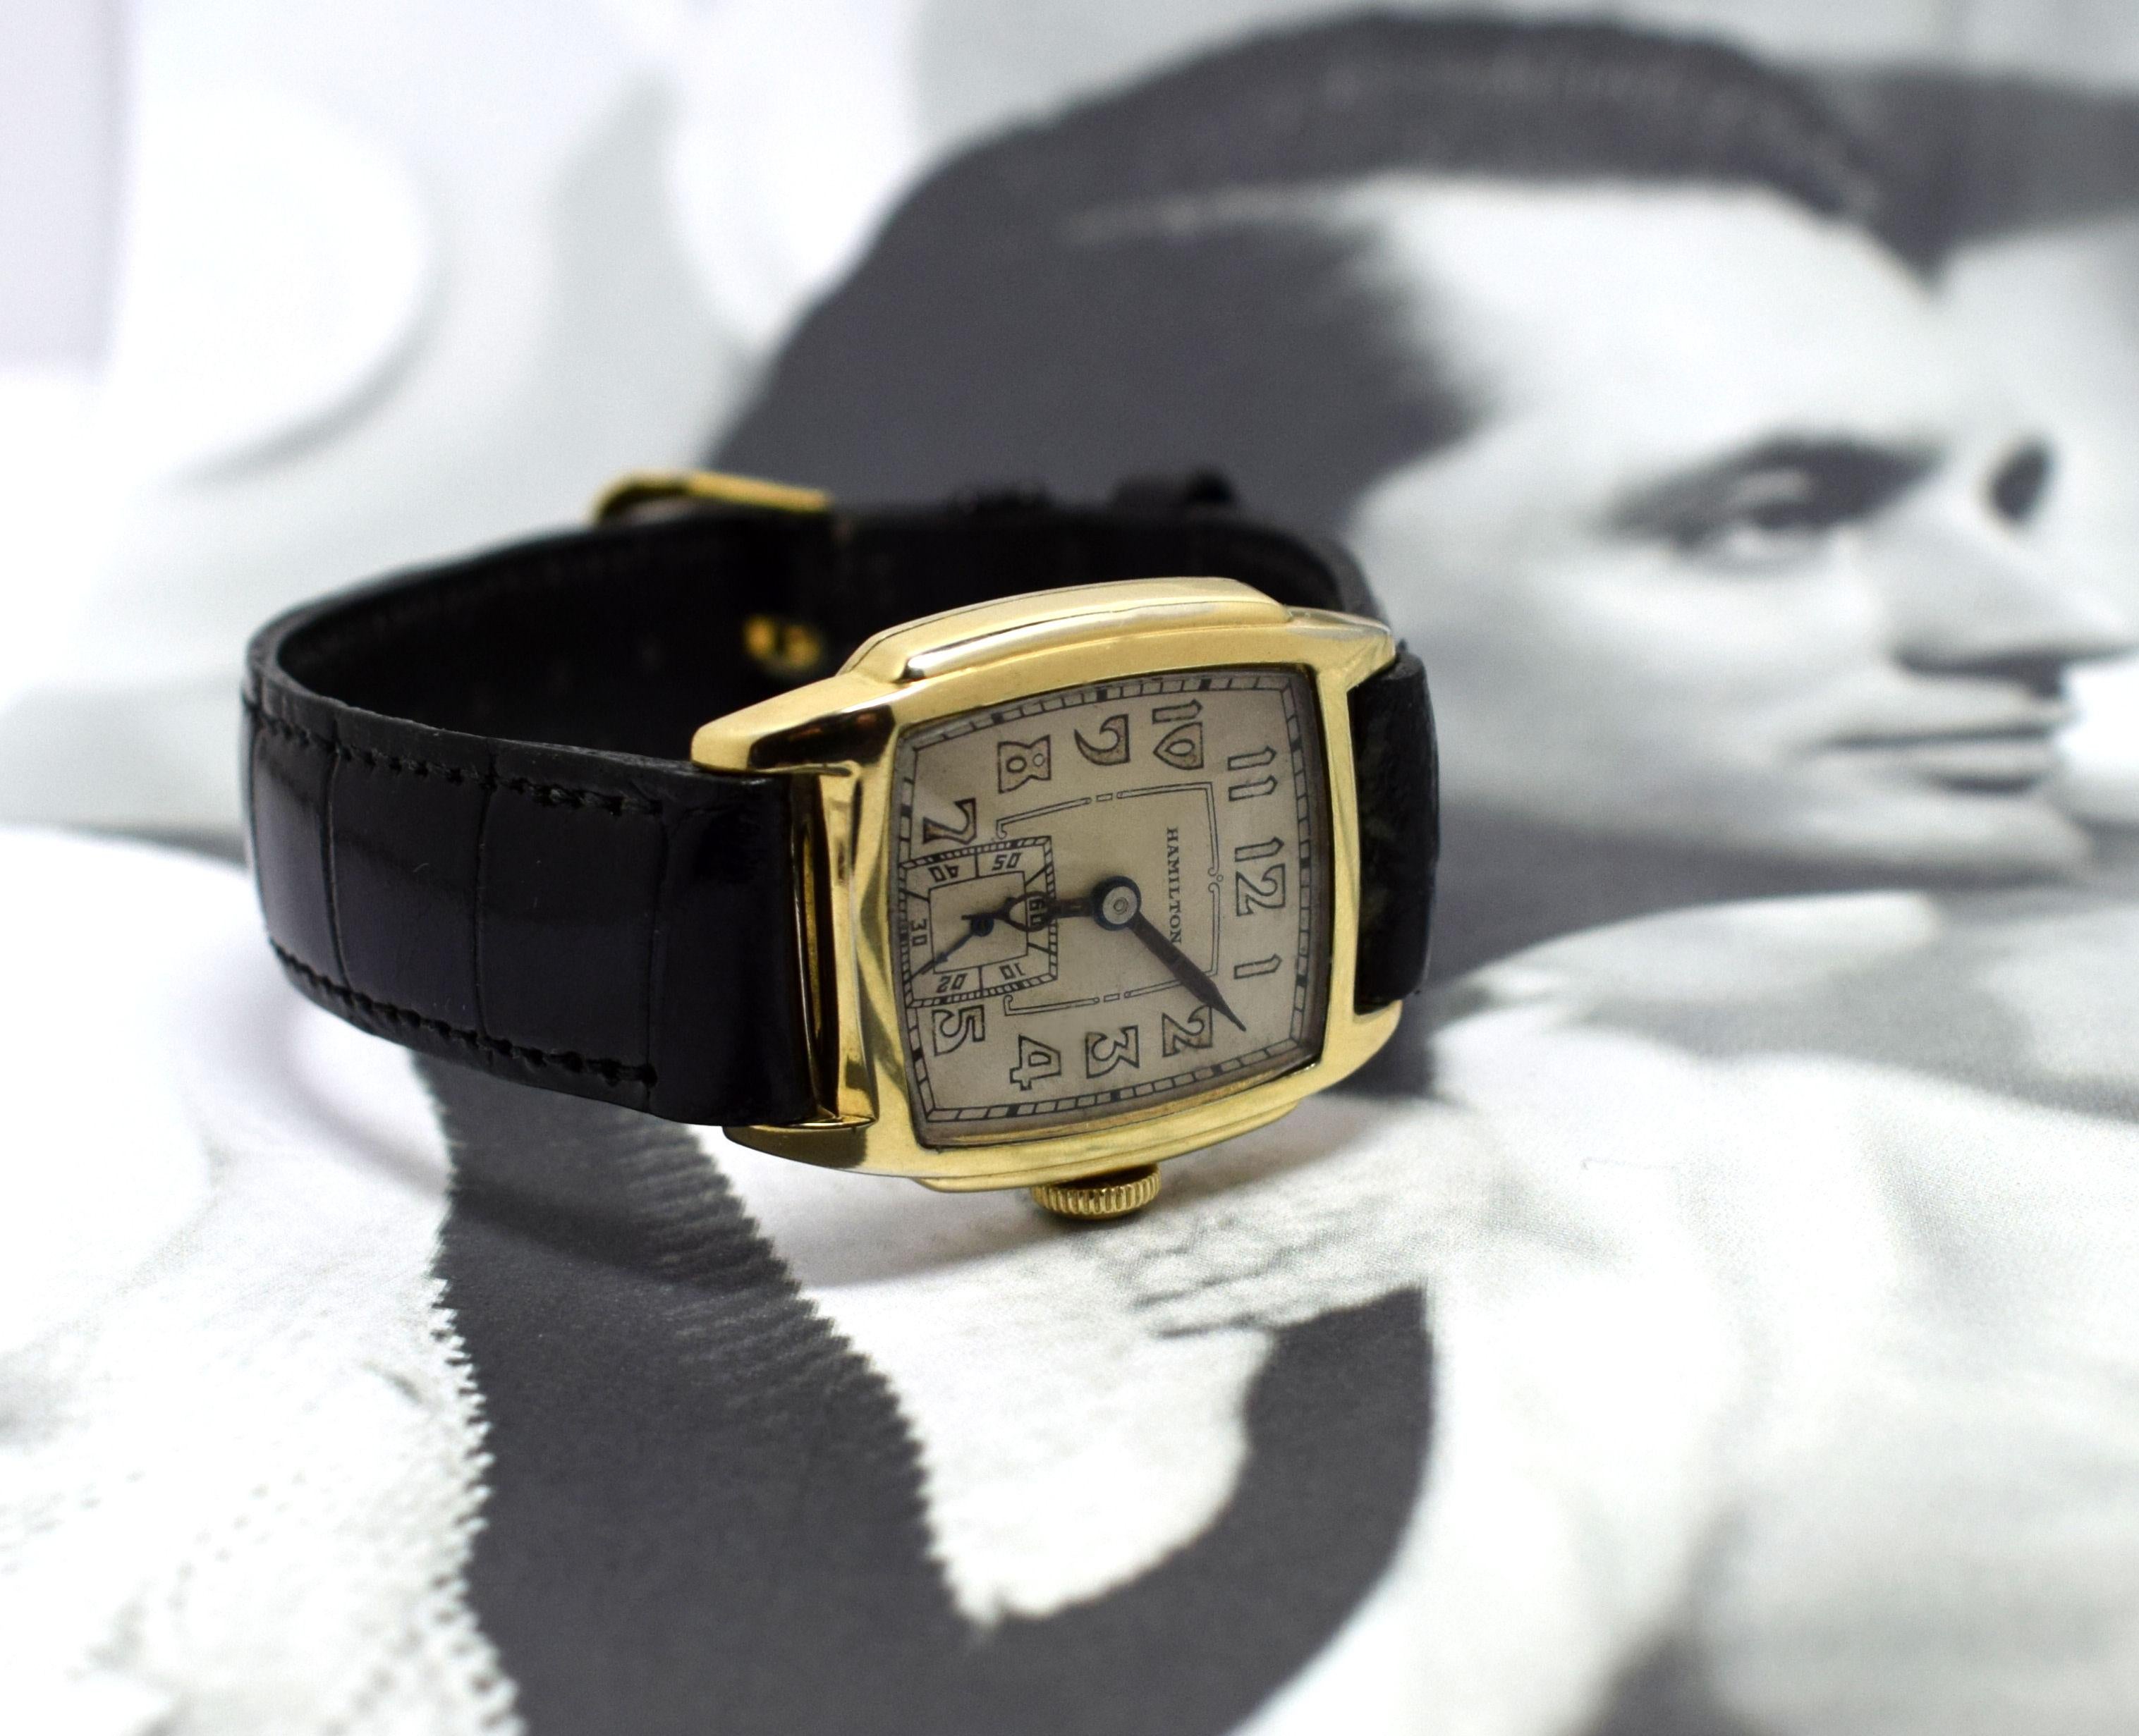 Extremely stylish Art Deco American gents wrist watch dating to 1933 and made by Hamilton Watchmakers.  This model was produced from 1933 to 1937. Wonderful yellow gold stepped tonneau case which is in exceptional condition for it's age, free from